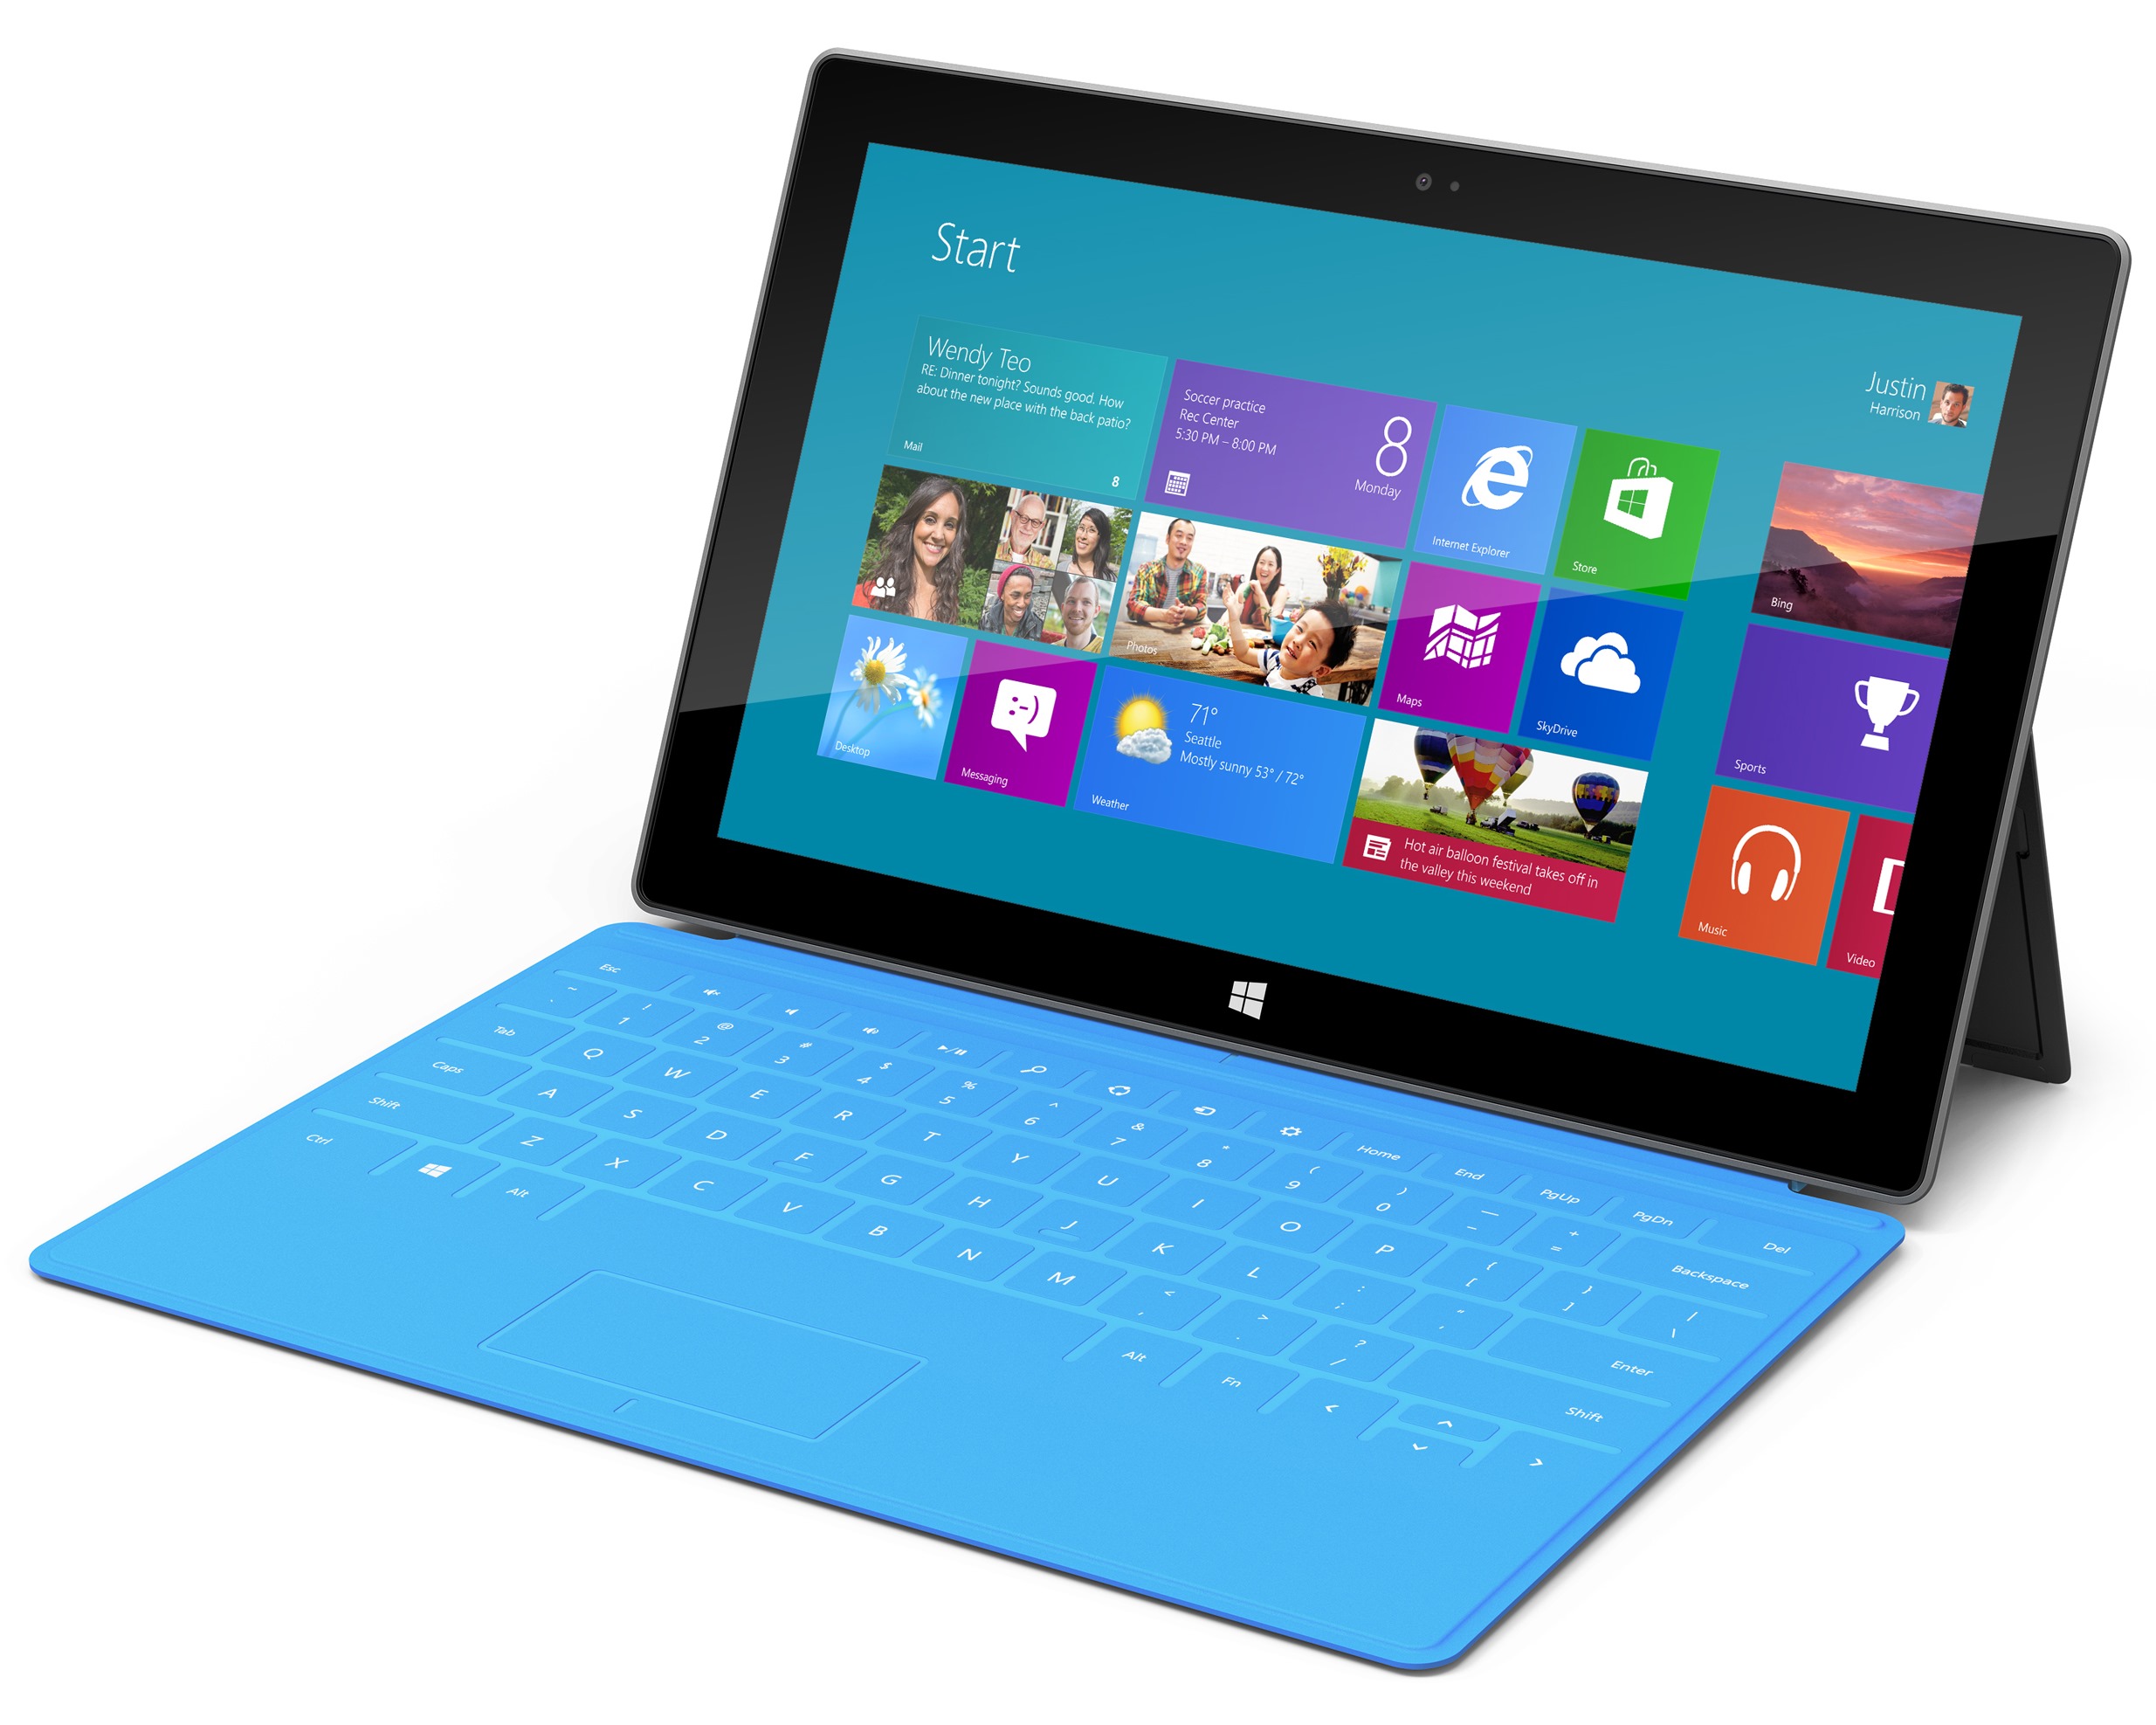 Microsoft Surface (Windows RT) Full Specifications And Price Details